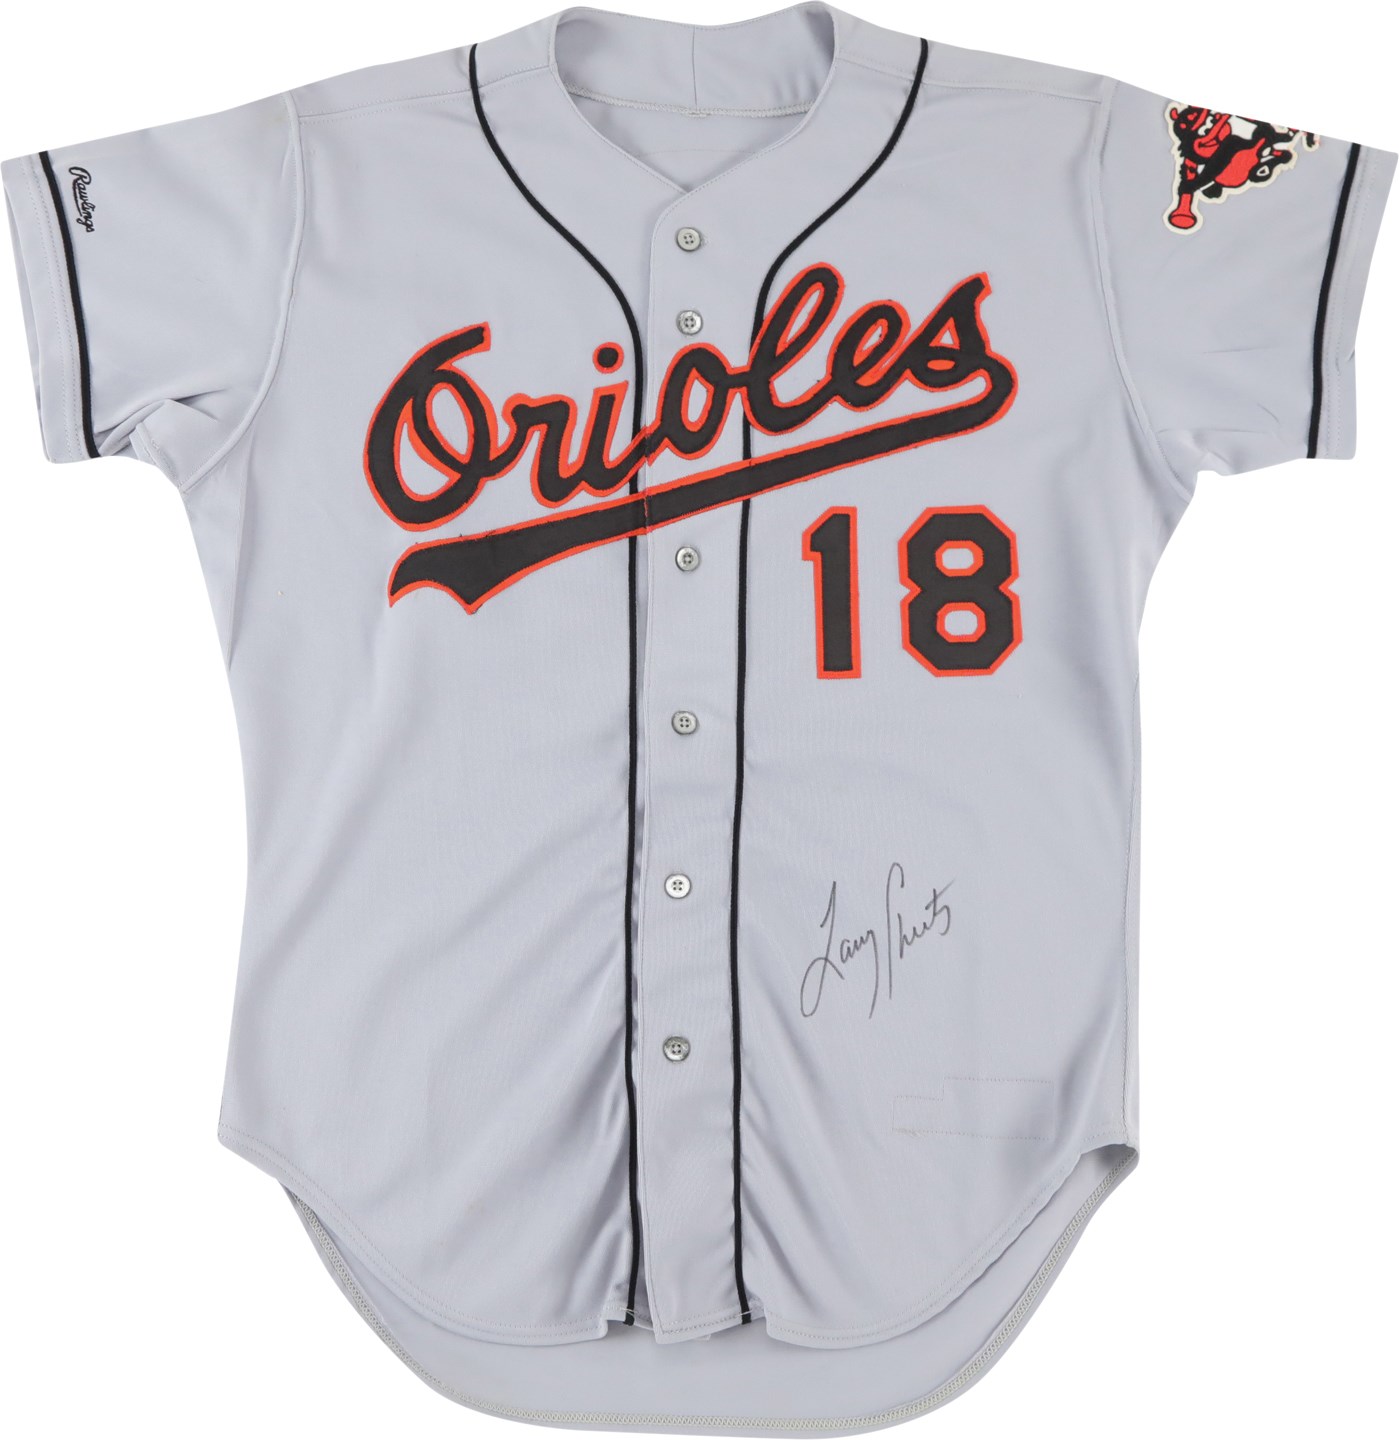 - 1987 Larry Sheets Baltimore Orioles Signed Prototype Jersey